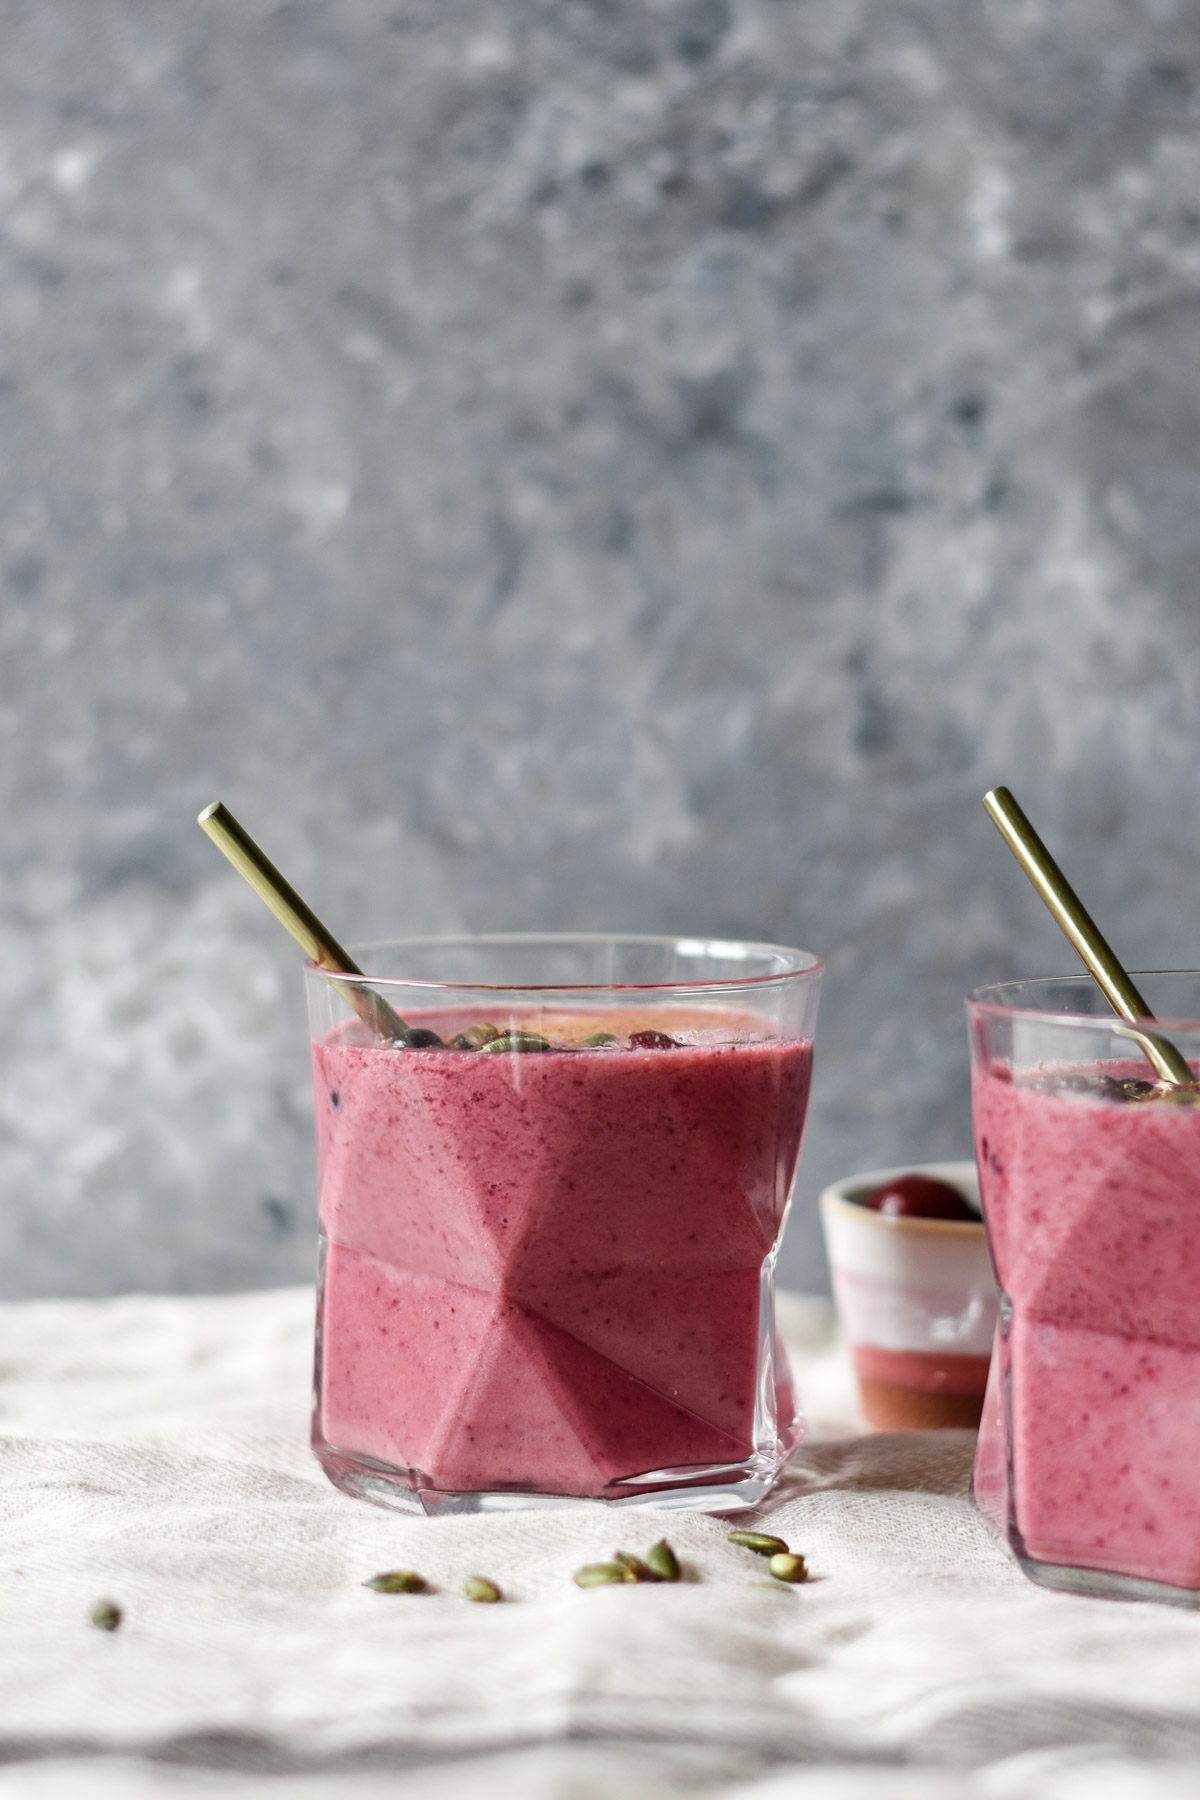 two geometrical glasses filled with pink smoothie